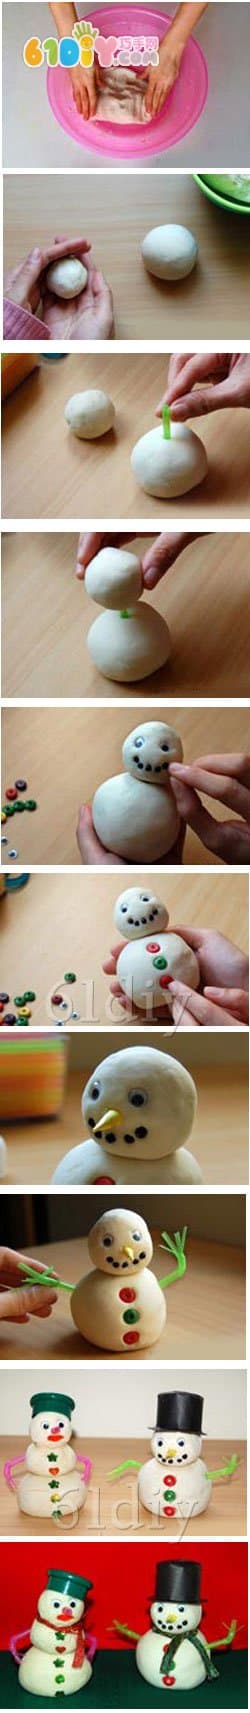 How to make a snowman with clay